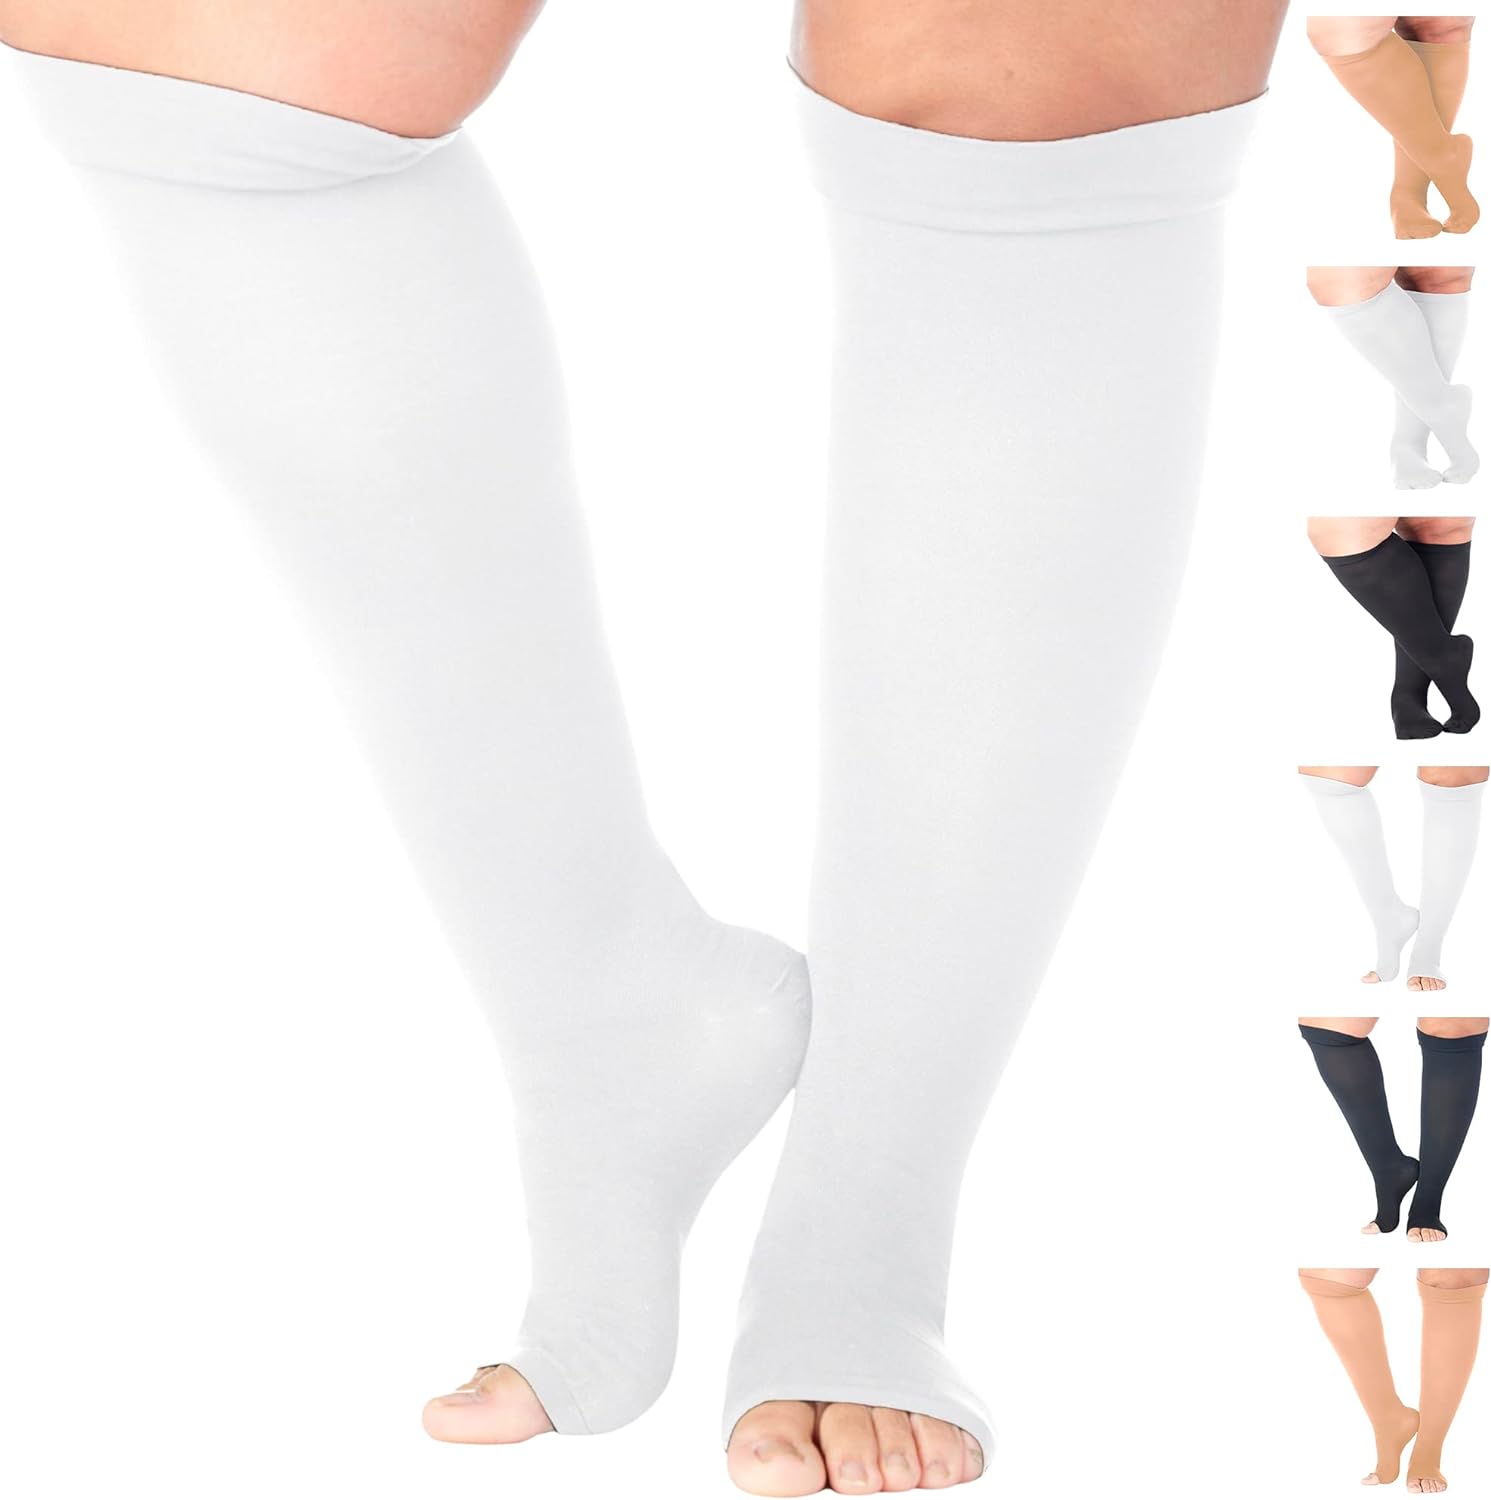 Made in The USA - Unisex Compression Socks 10-20mmHg with OpenClosed Toe